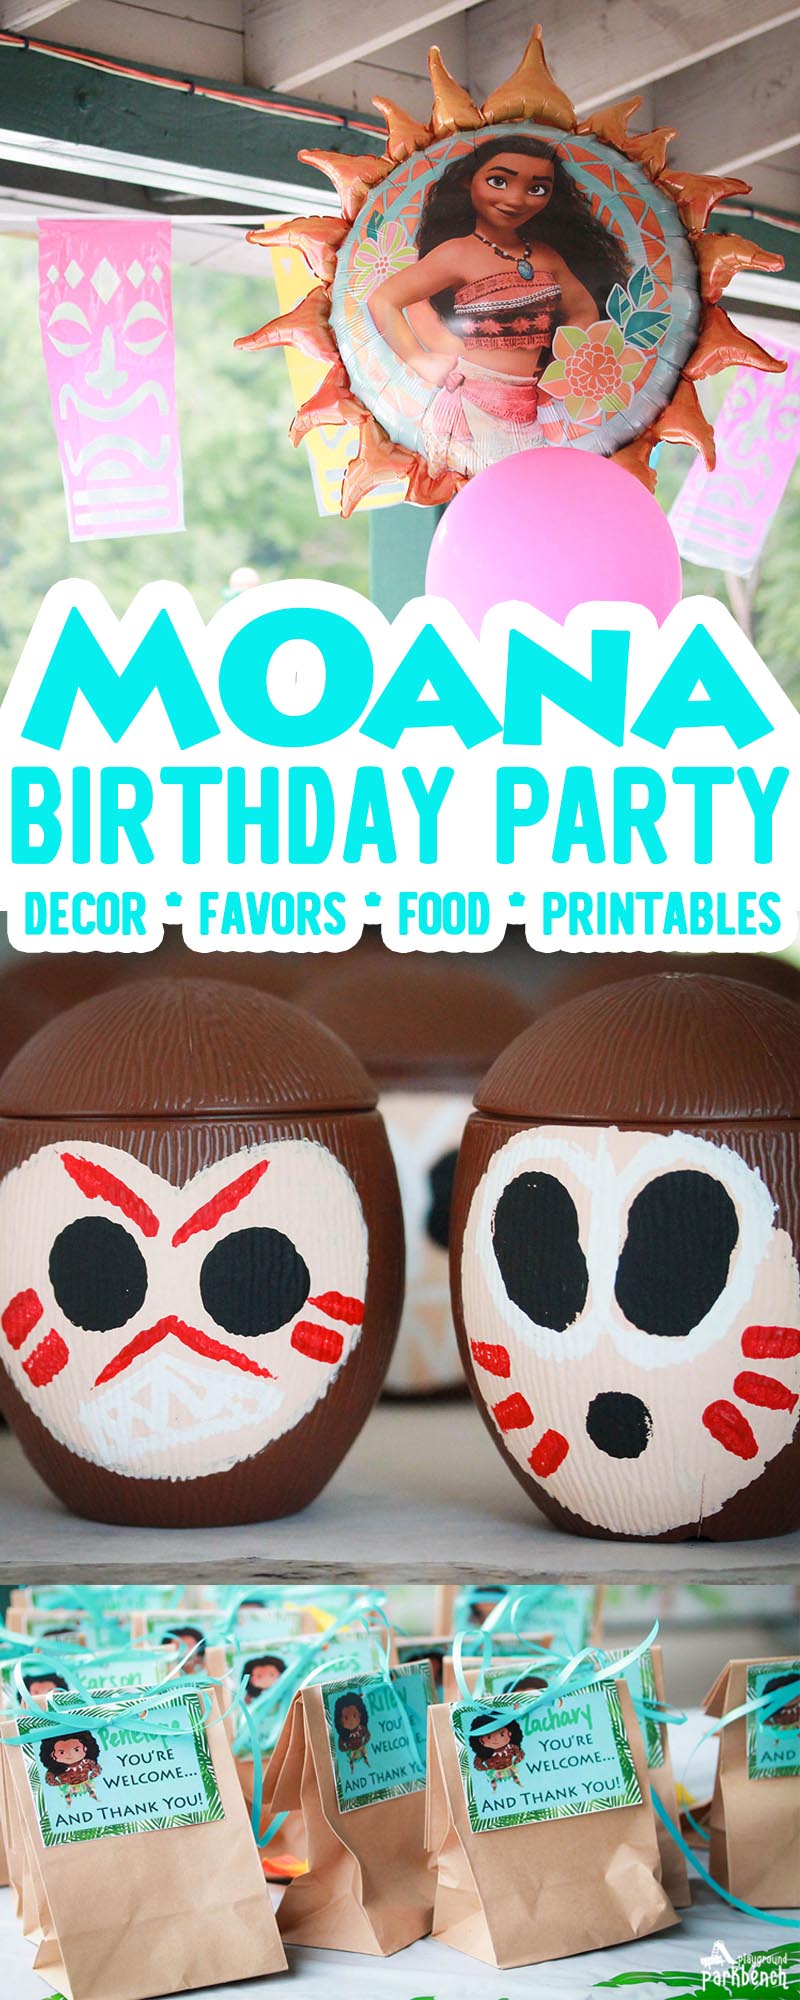 Does your child want a Moana Birthday Party Theme? Check out our Moana Party - featuring special touches for everything from the invitation, to party decor, Heart of Te Fiti food and favors, kakamoras and more! Downloadable Moana party printables too! | Kids Birthday Party | Moana Party | Disney Moana |